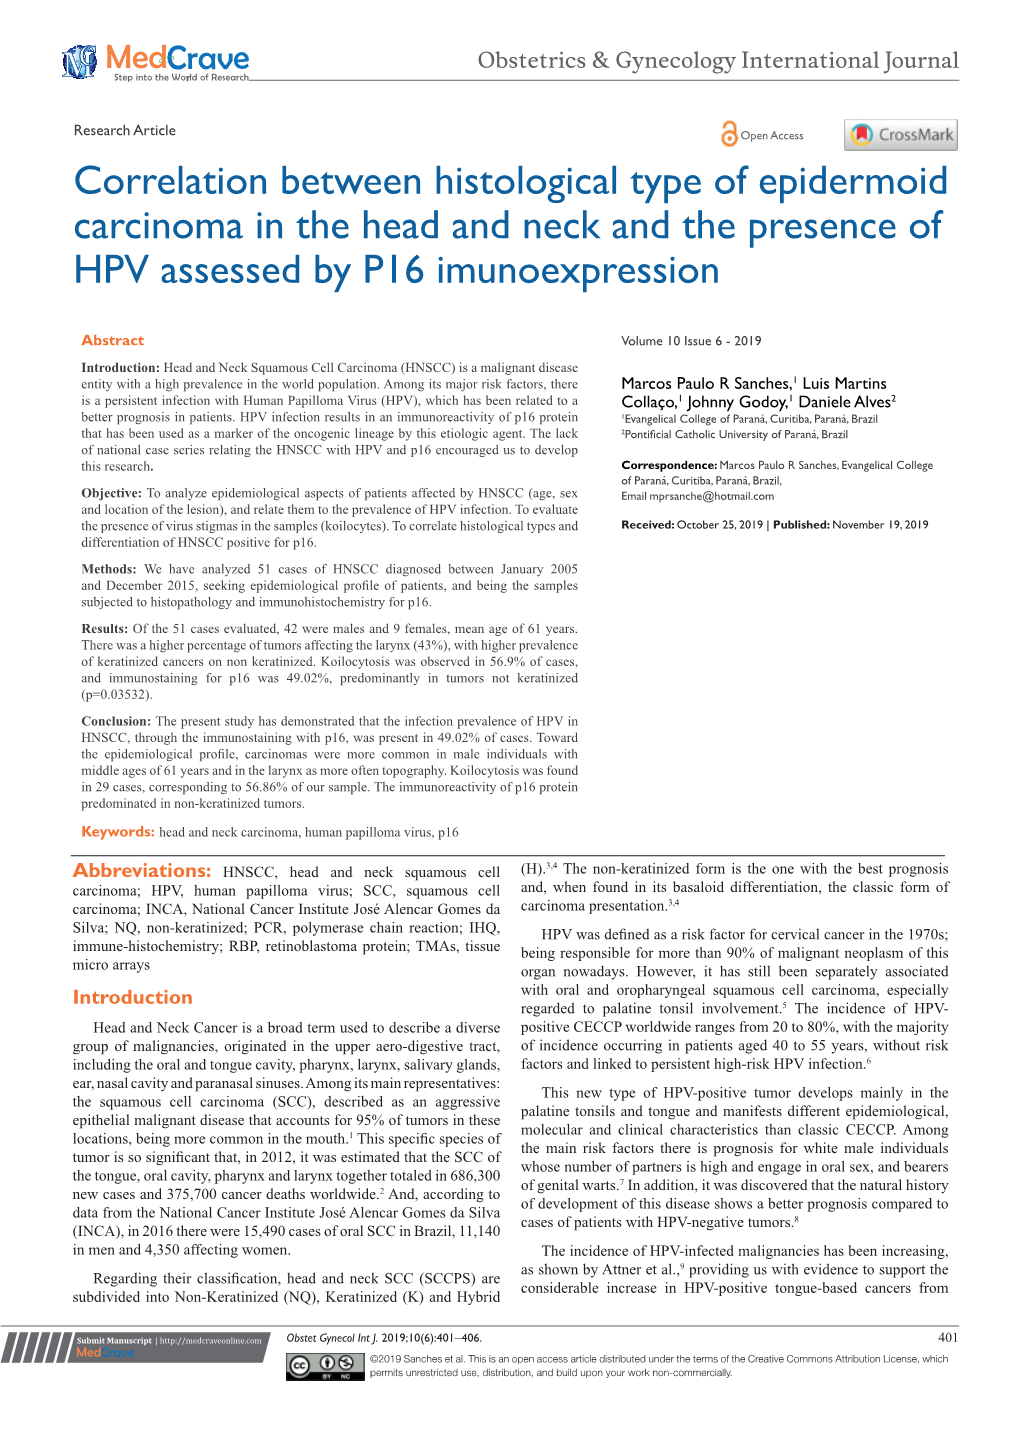 Correlation Between Histological Type of Epidermoid Carcinoma in the Head and Neck and the Presence of HPV Assessed by P16 Imunoexpression